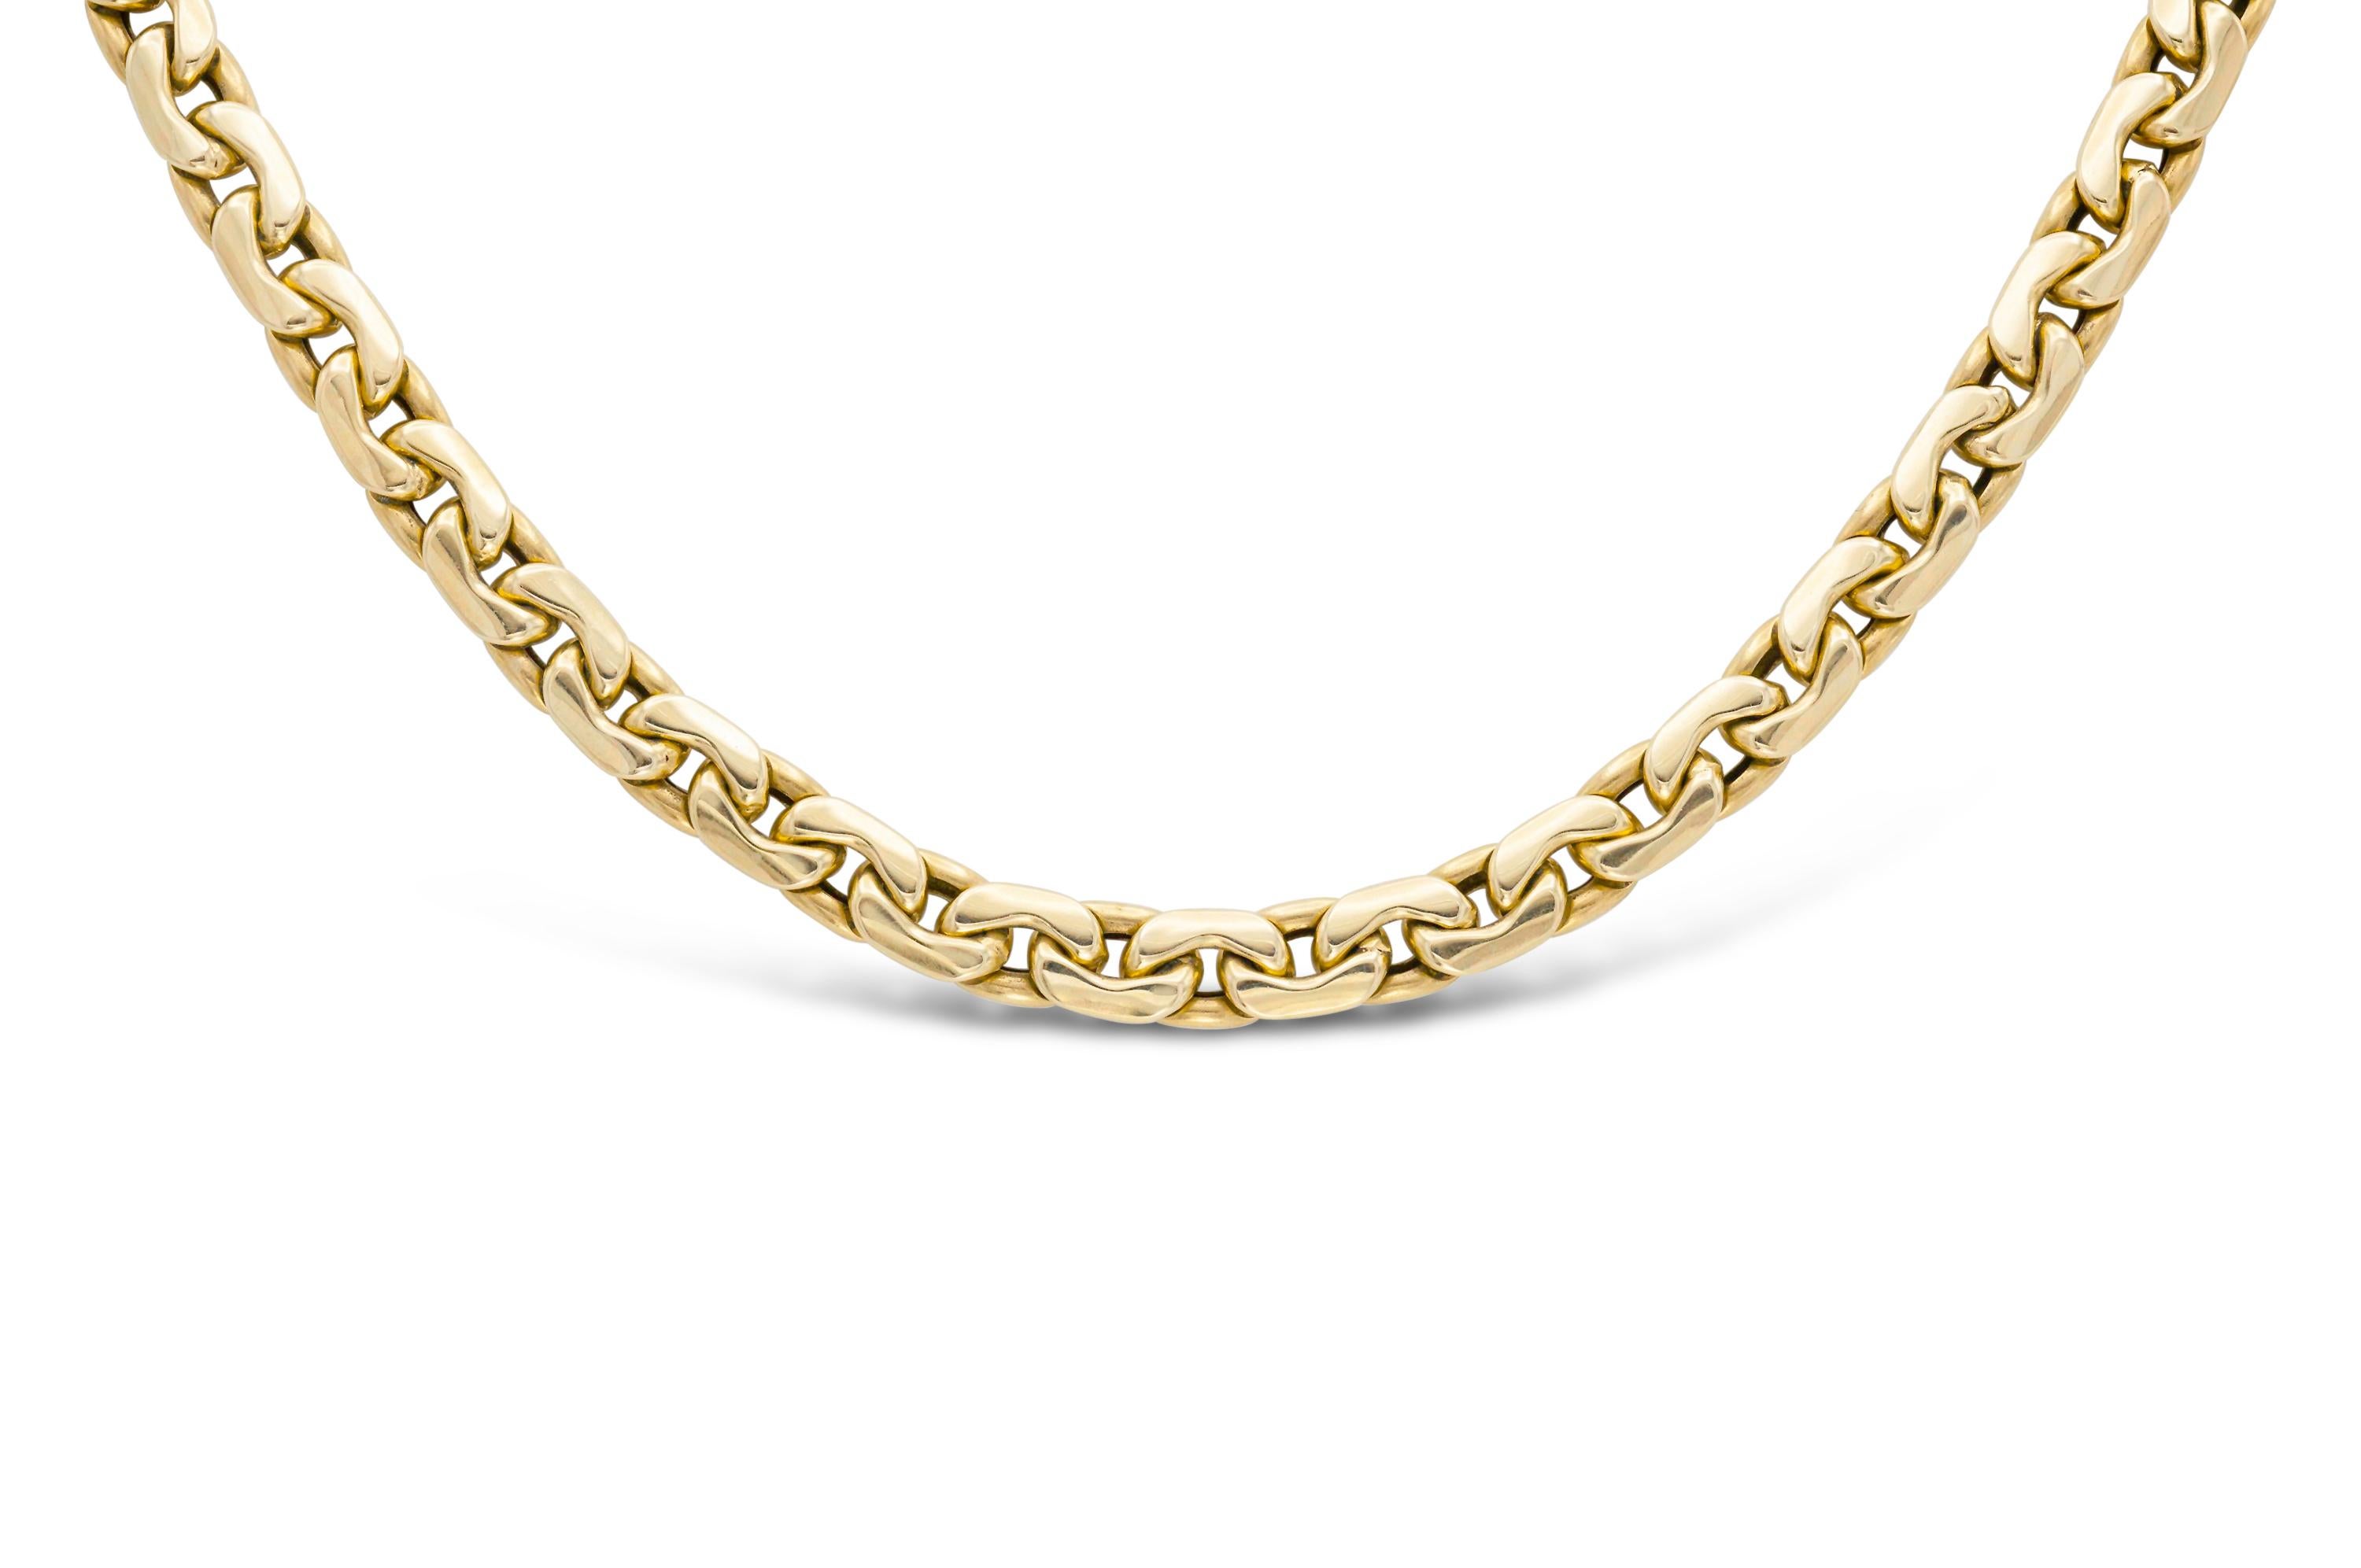 Finely crafted in 14k yellow gold.
Made in Italy.
20 1/2